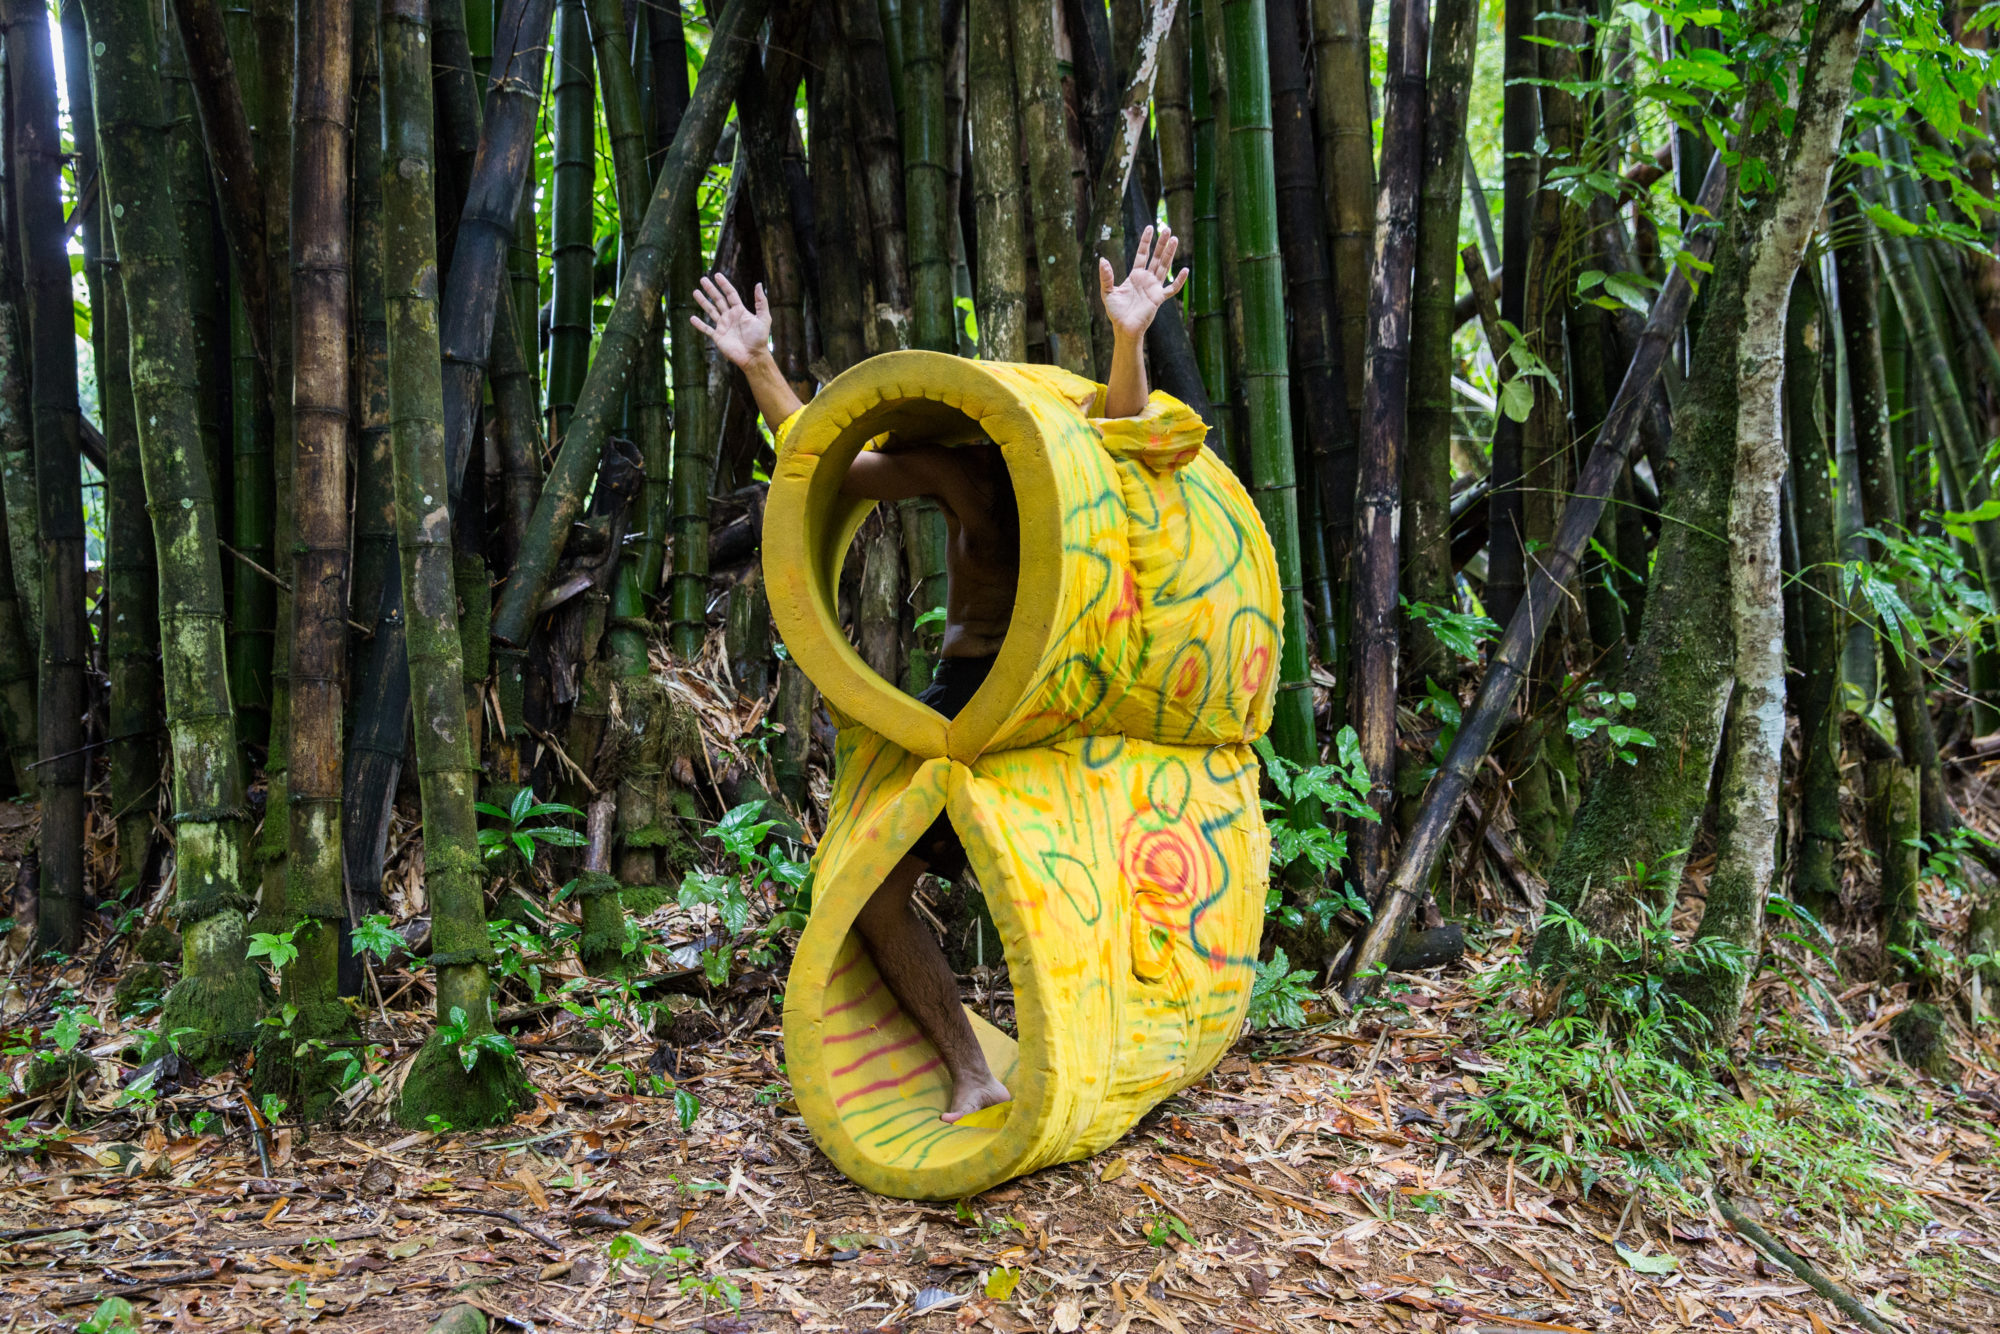 person stands in yellow foam structure among trees